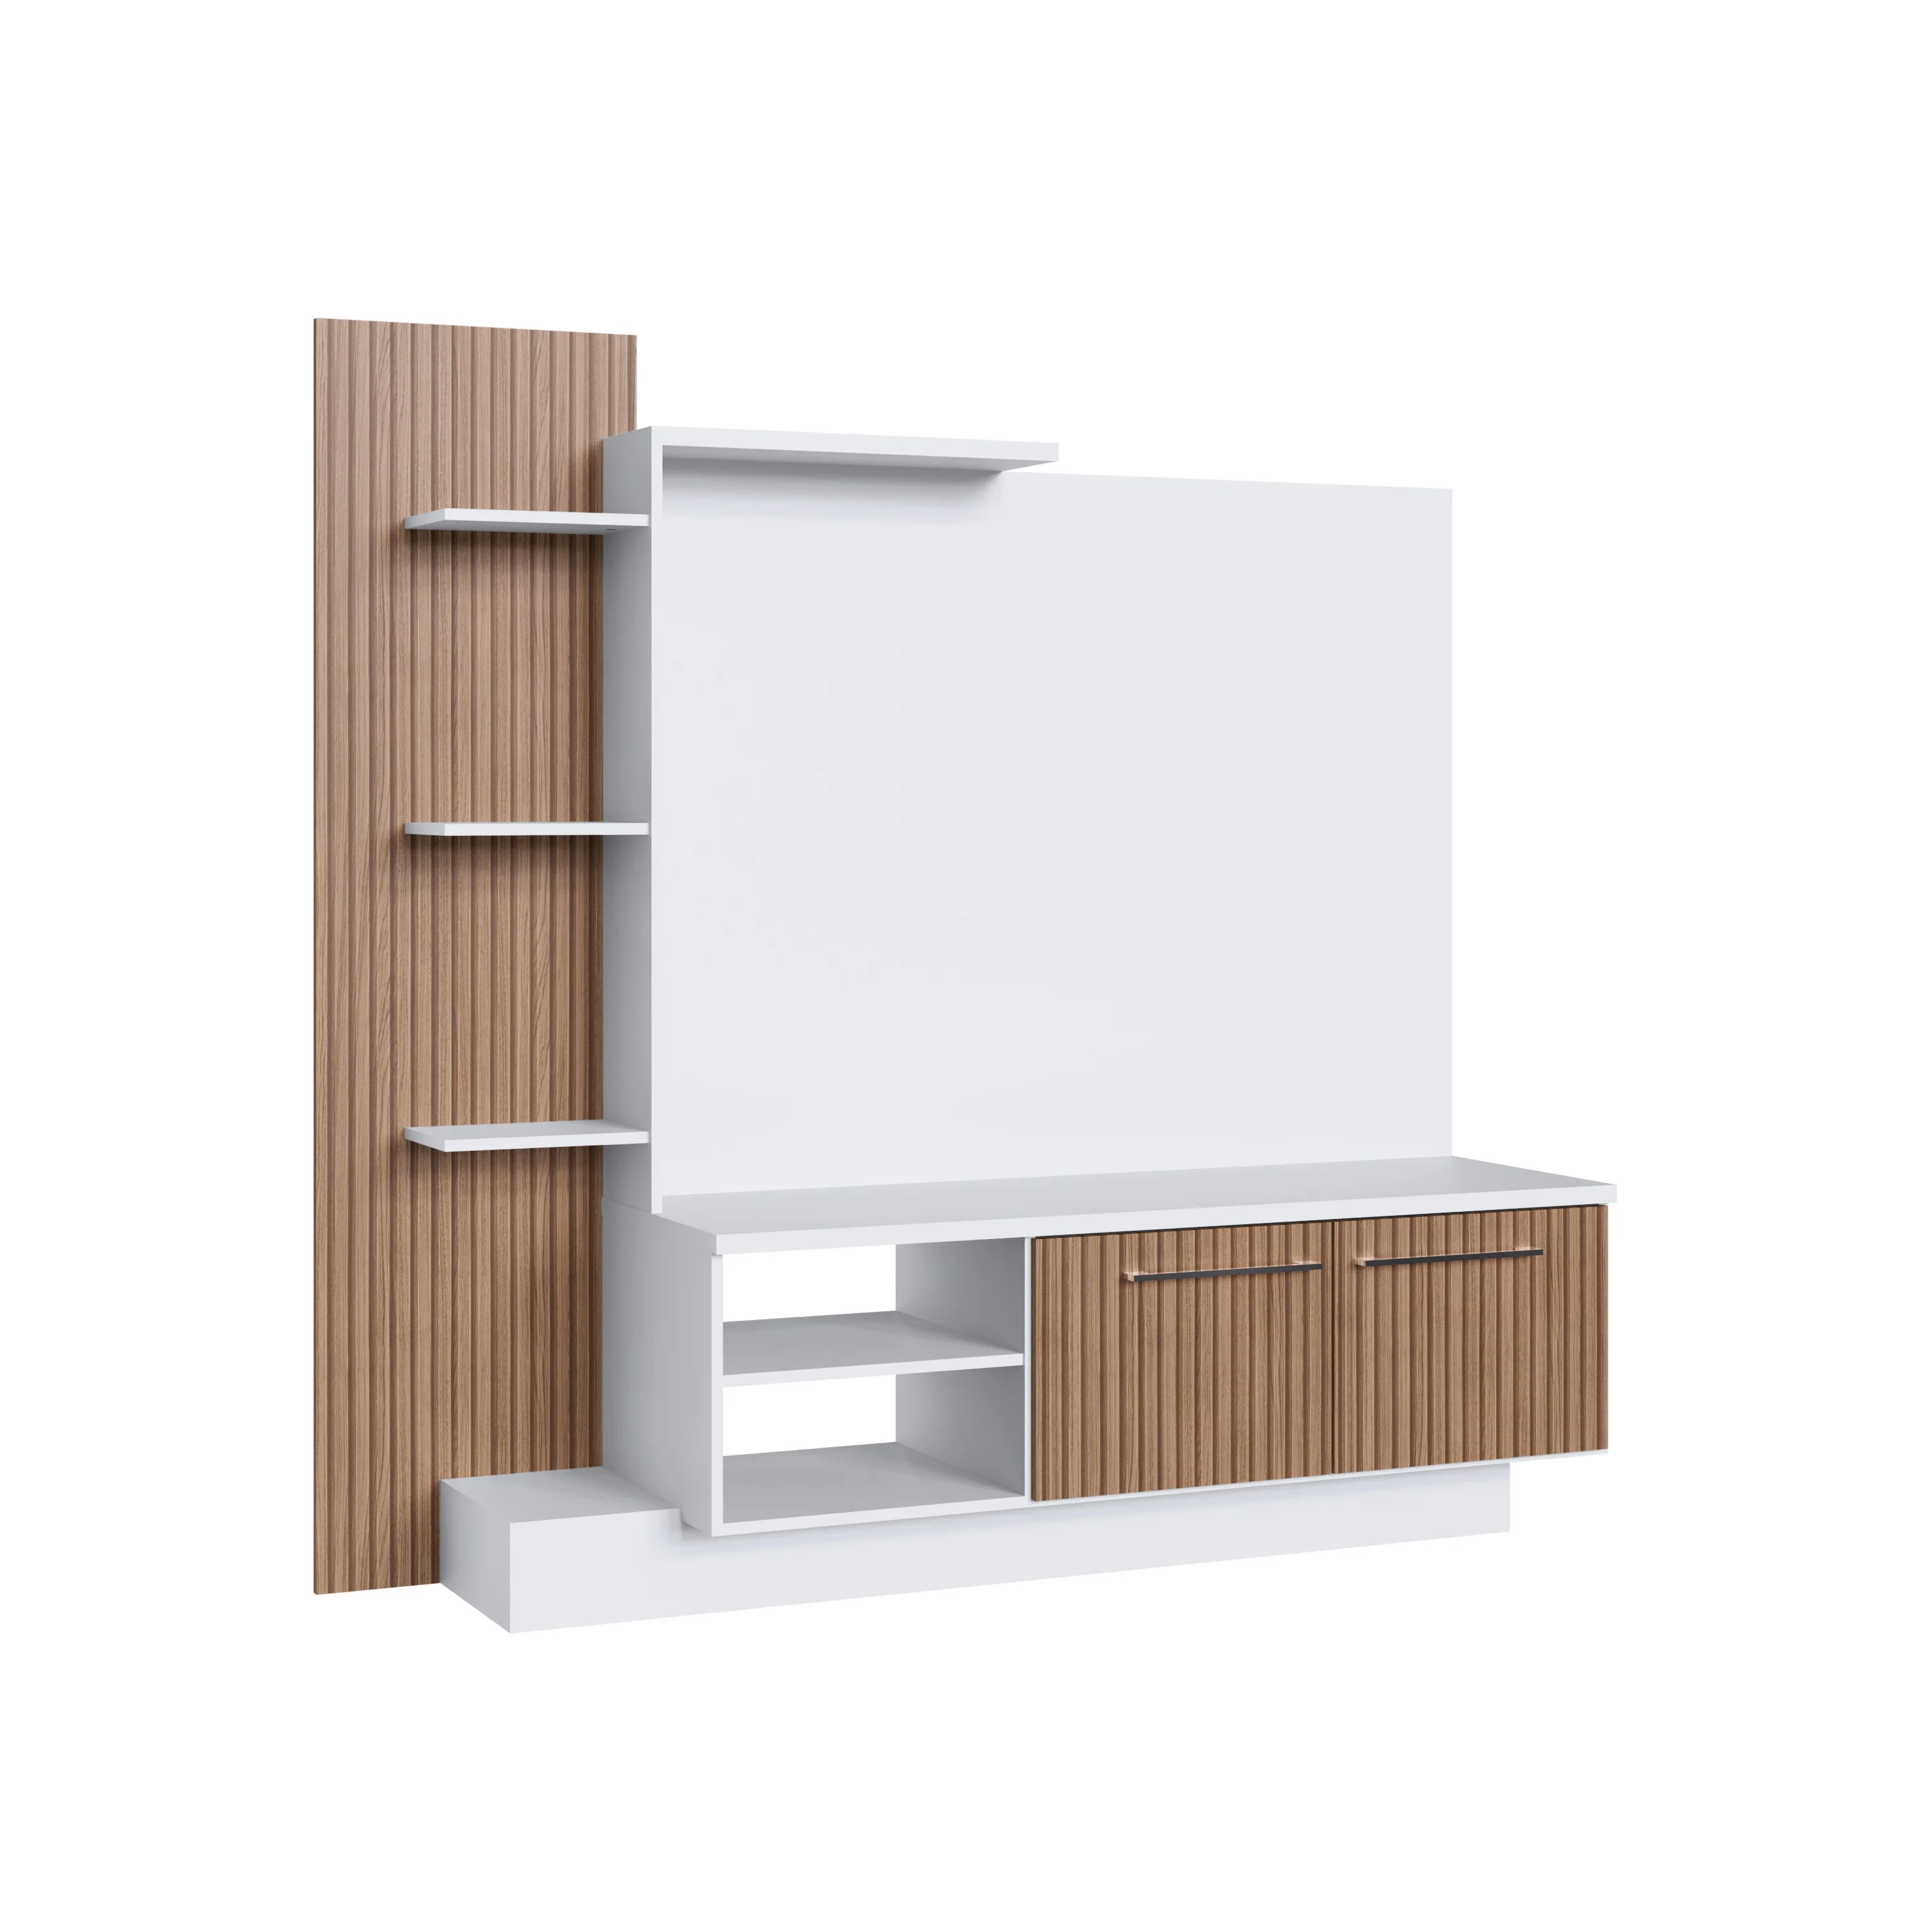 Modern Style Entertainment Center GABRIELA 2 doors Wooden Home Living Room Furniture Particleboard Milano/White Brazil Design